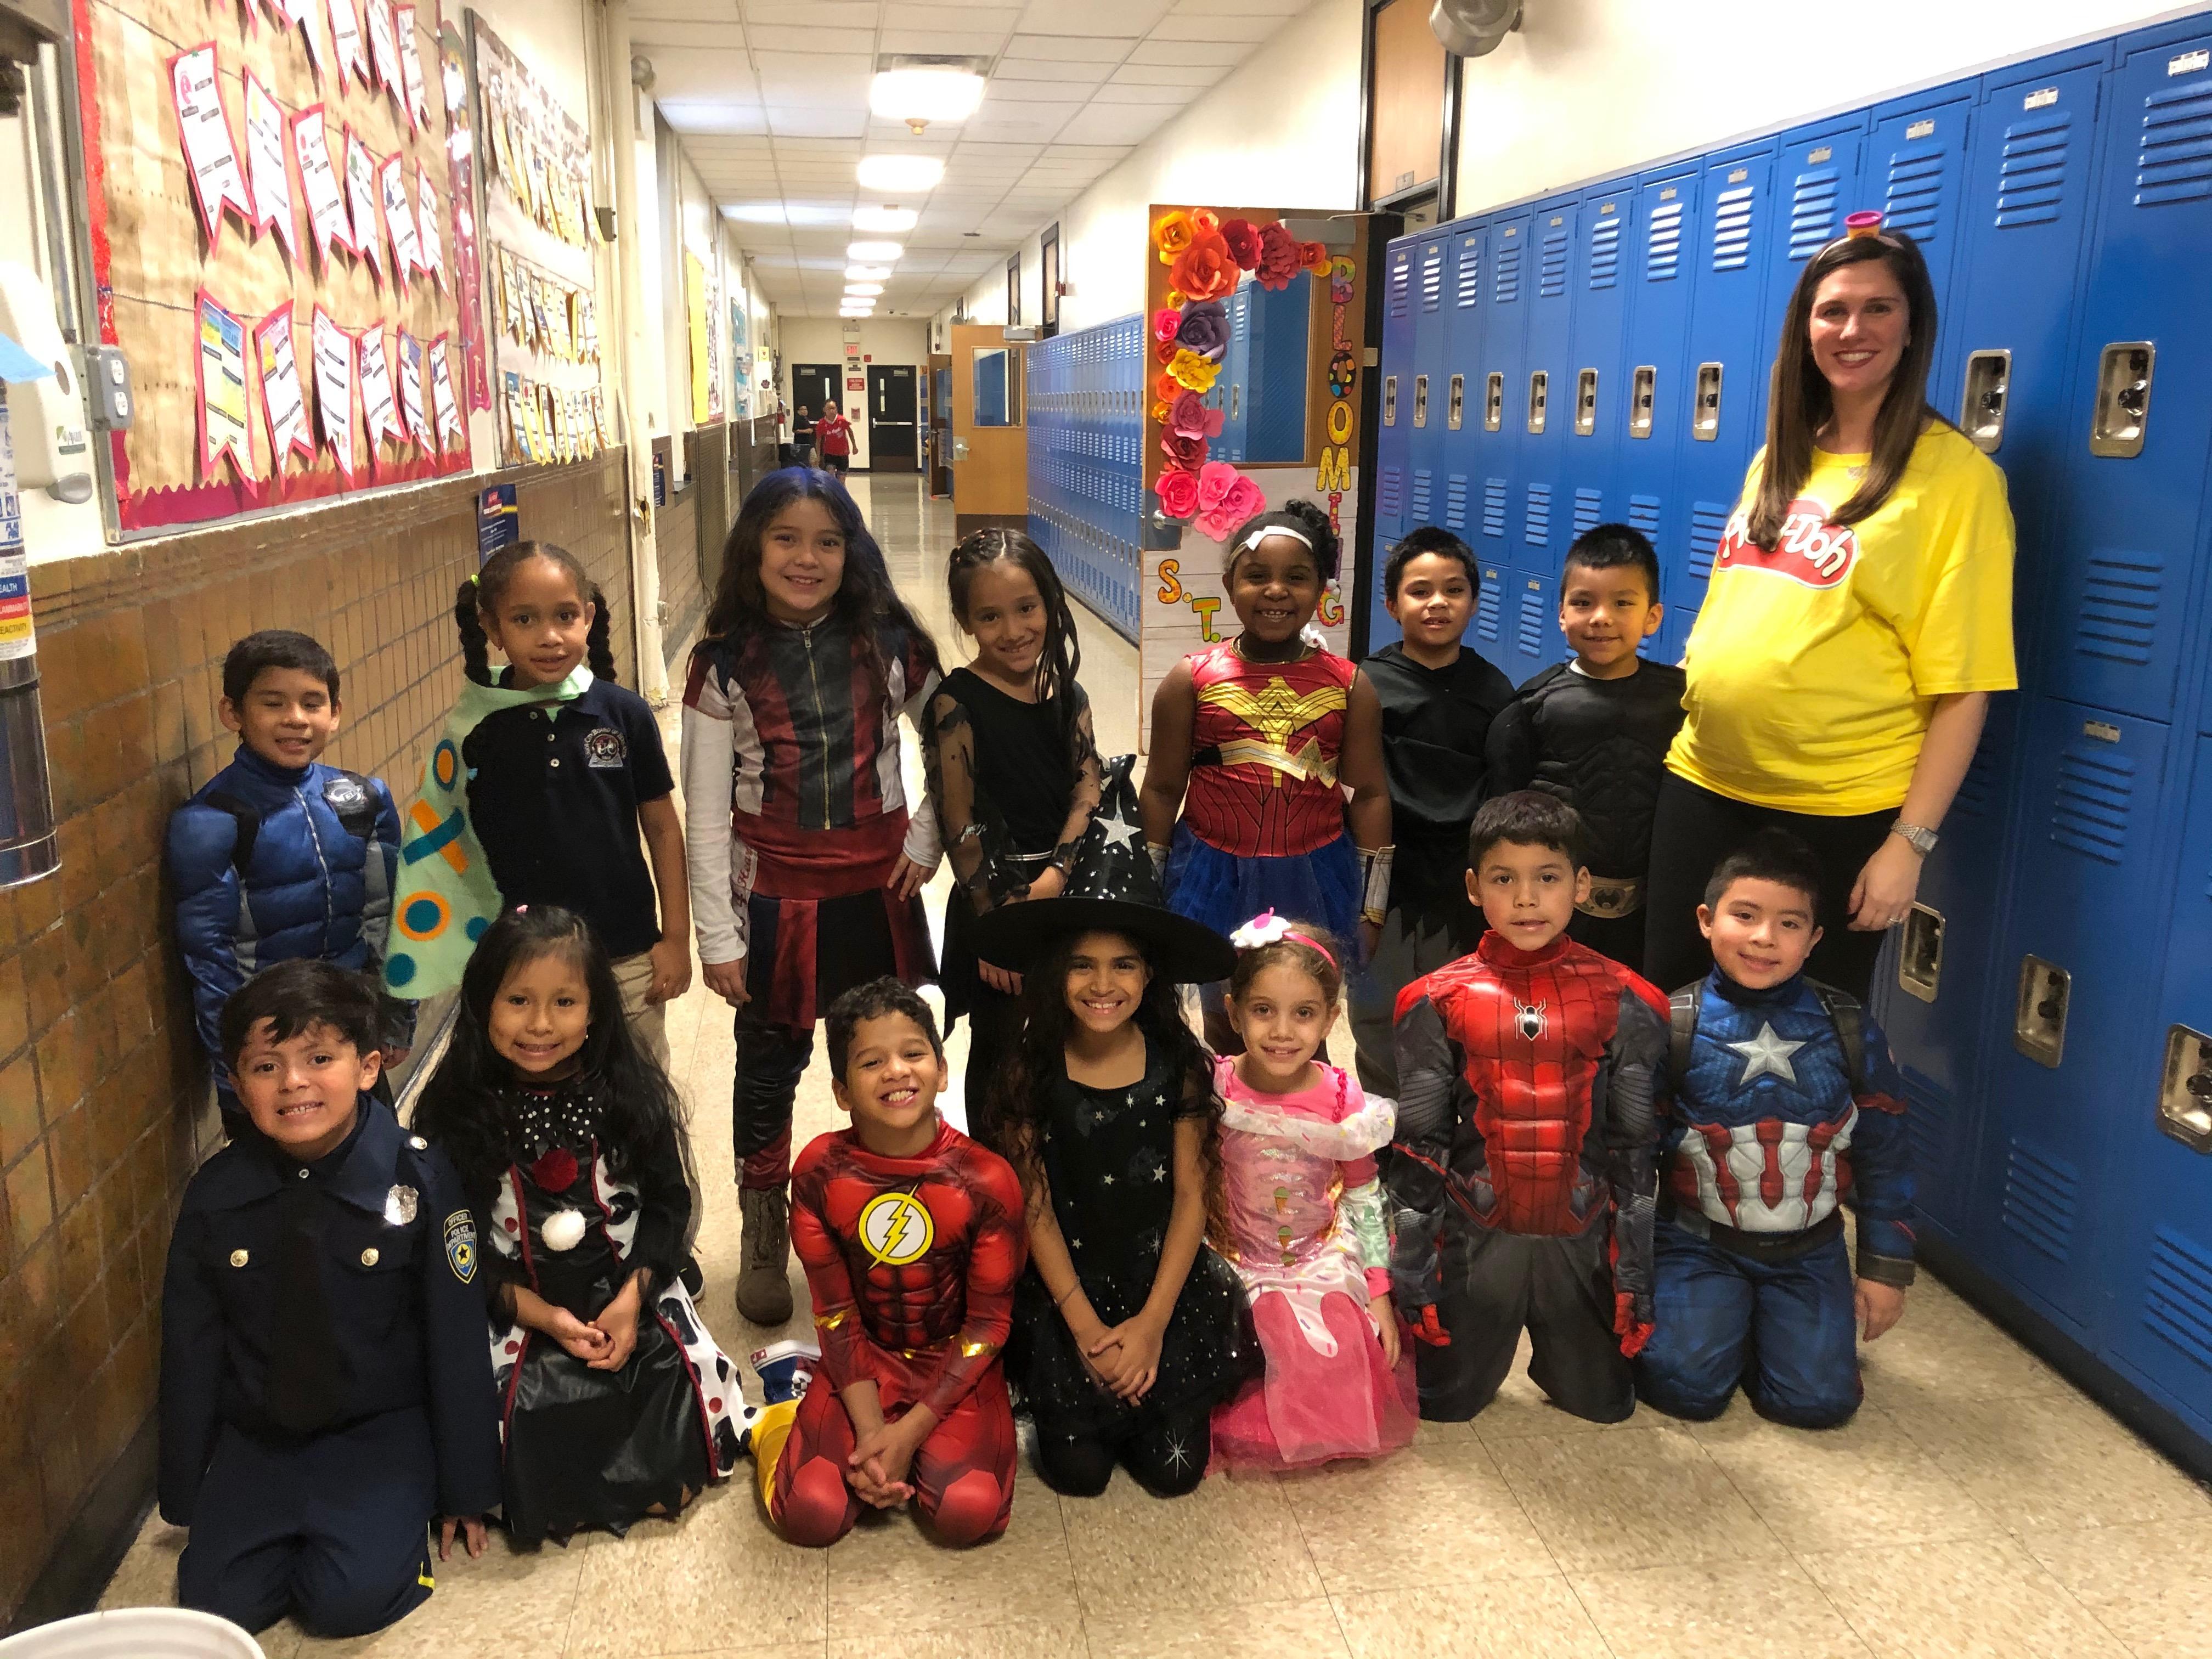 teacher with her class in the hallway showing off their costumes